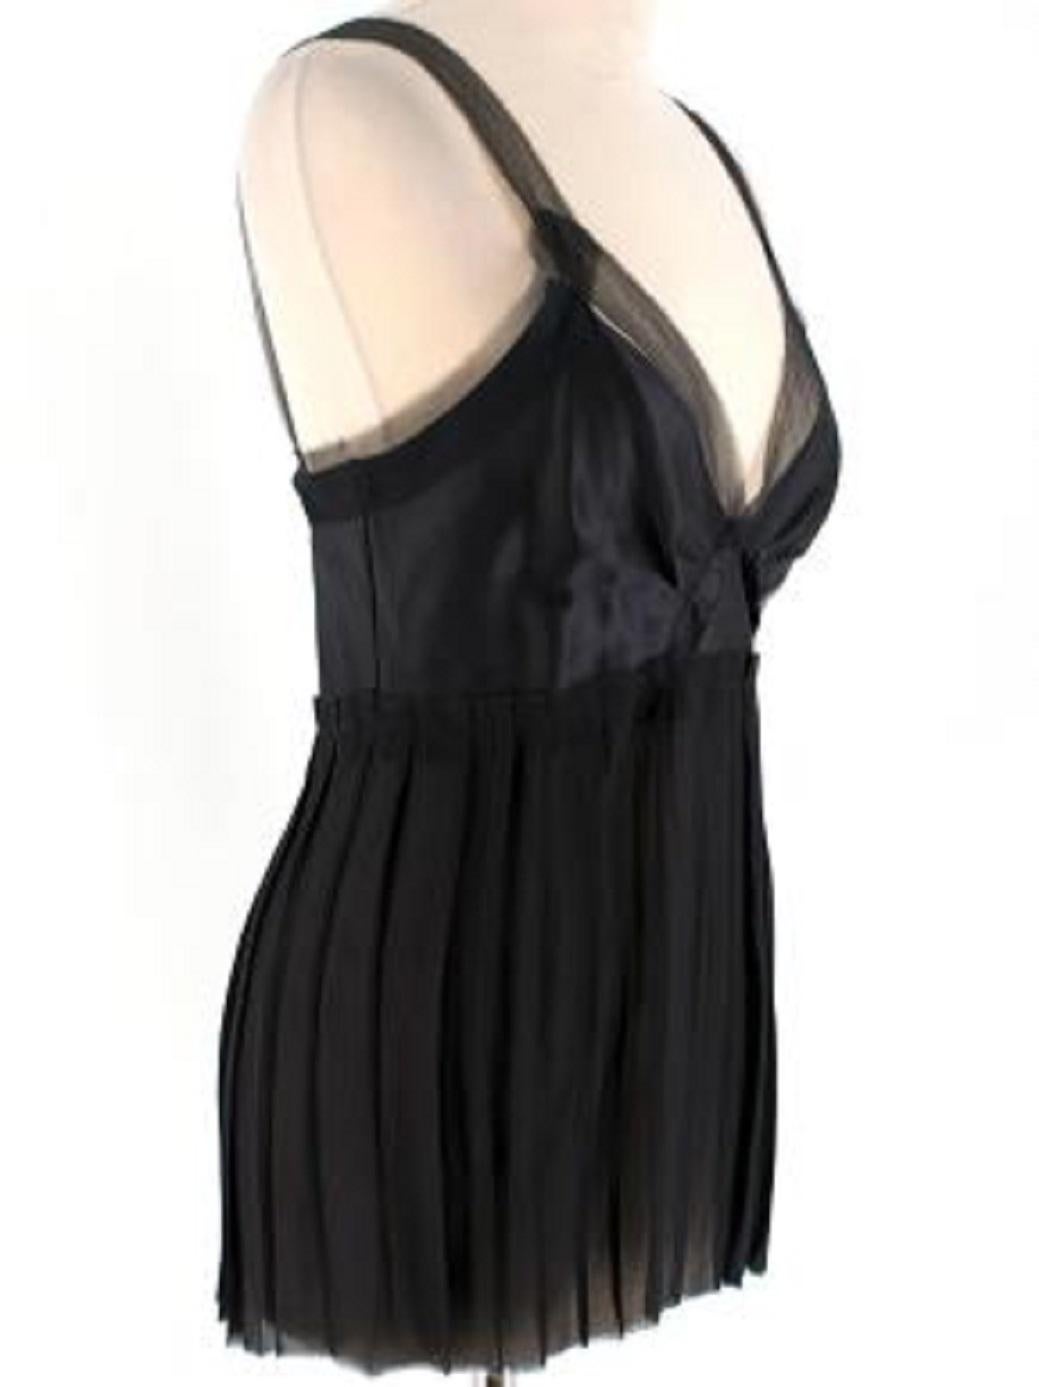 Lanvin Black Silk Pleated Top

-Sweetheart neckline 
-Pleated pantel 
-Raw edges 
-Zip fastening along the side 
-Sheer shoulder straps 

Material: 

100% Silk 

9.5/10 excellent conditions, please refer to images for further details. 

PLEASE NOTE,